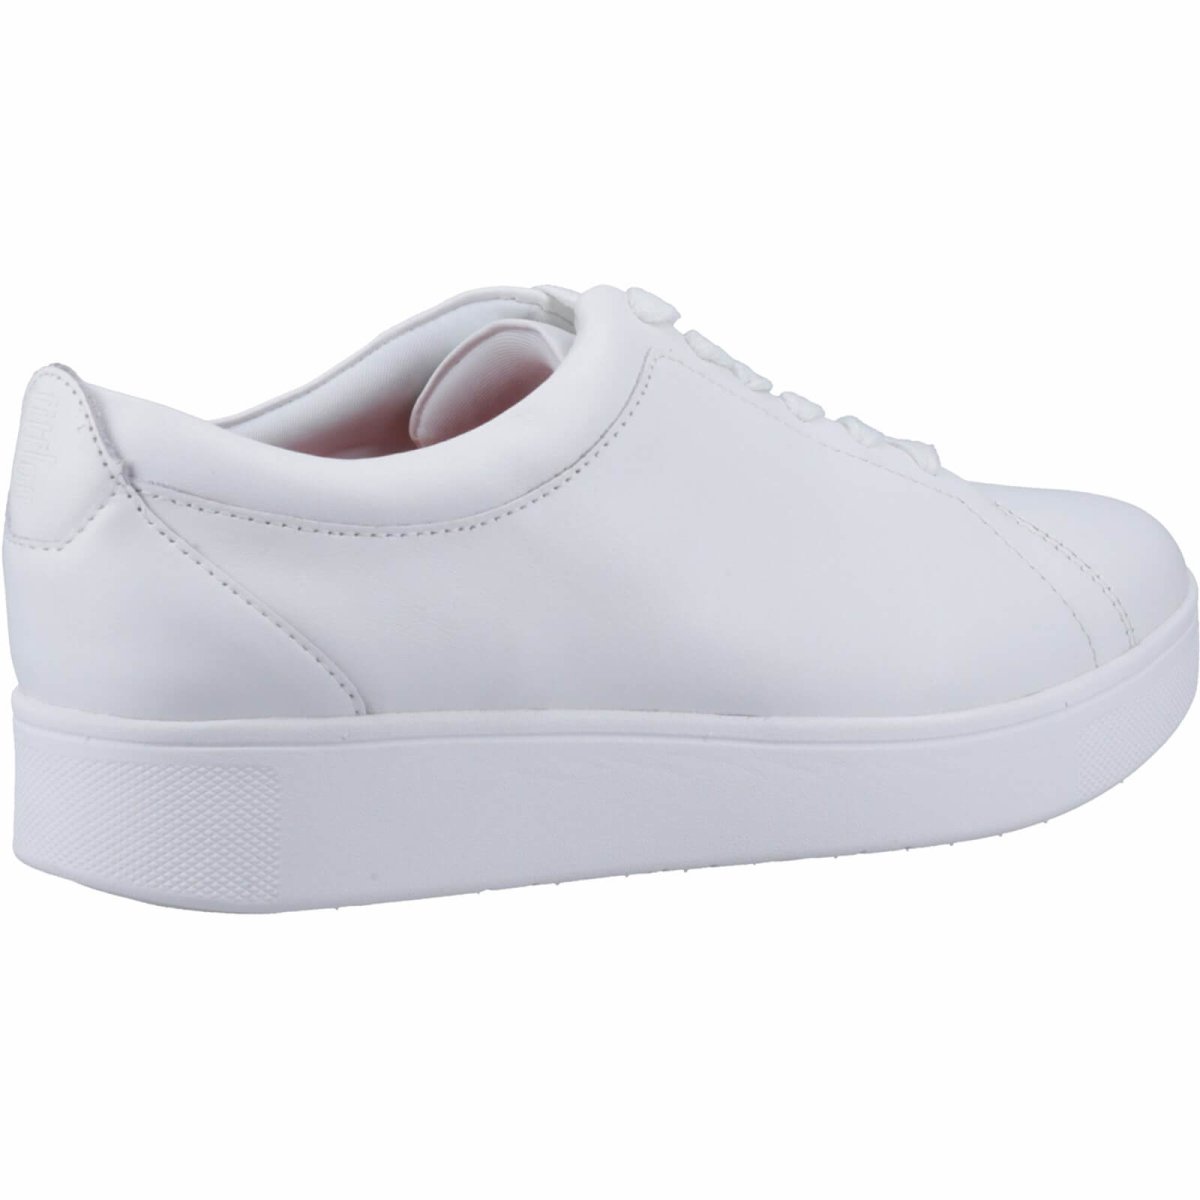 Fitflop Rally Leather Ladies Trainer Sneakers - Shoe Store Direct